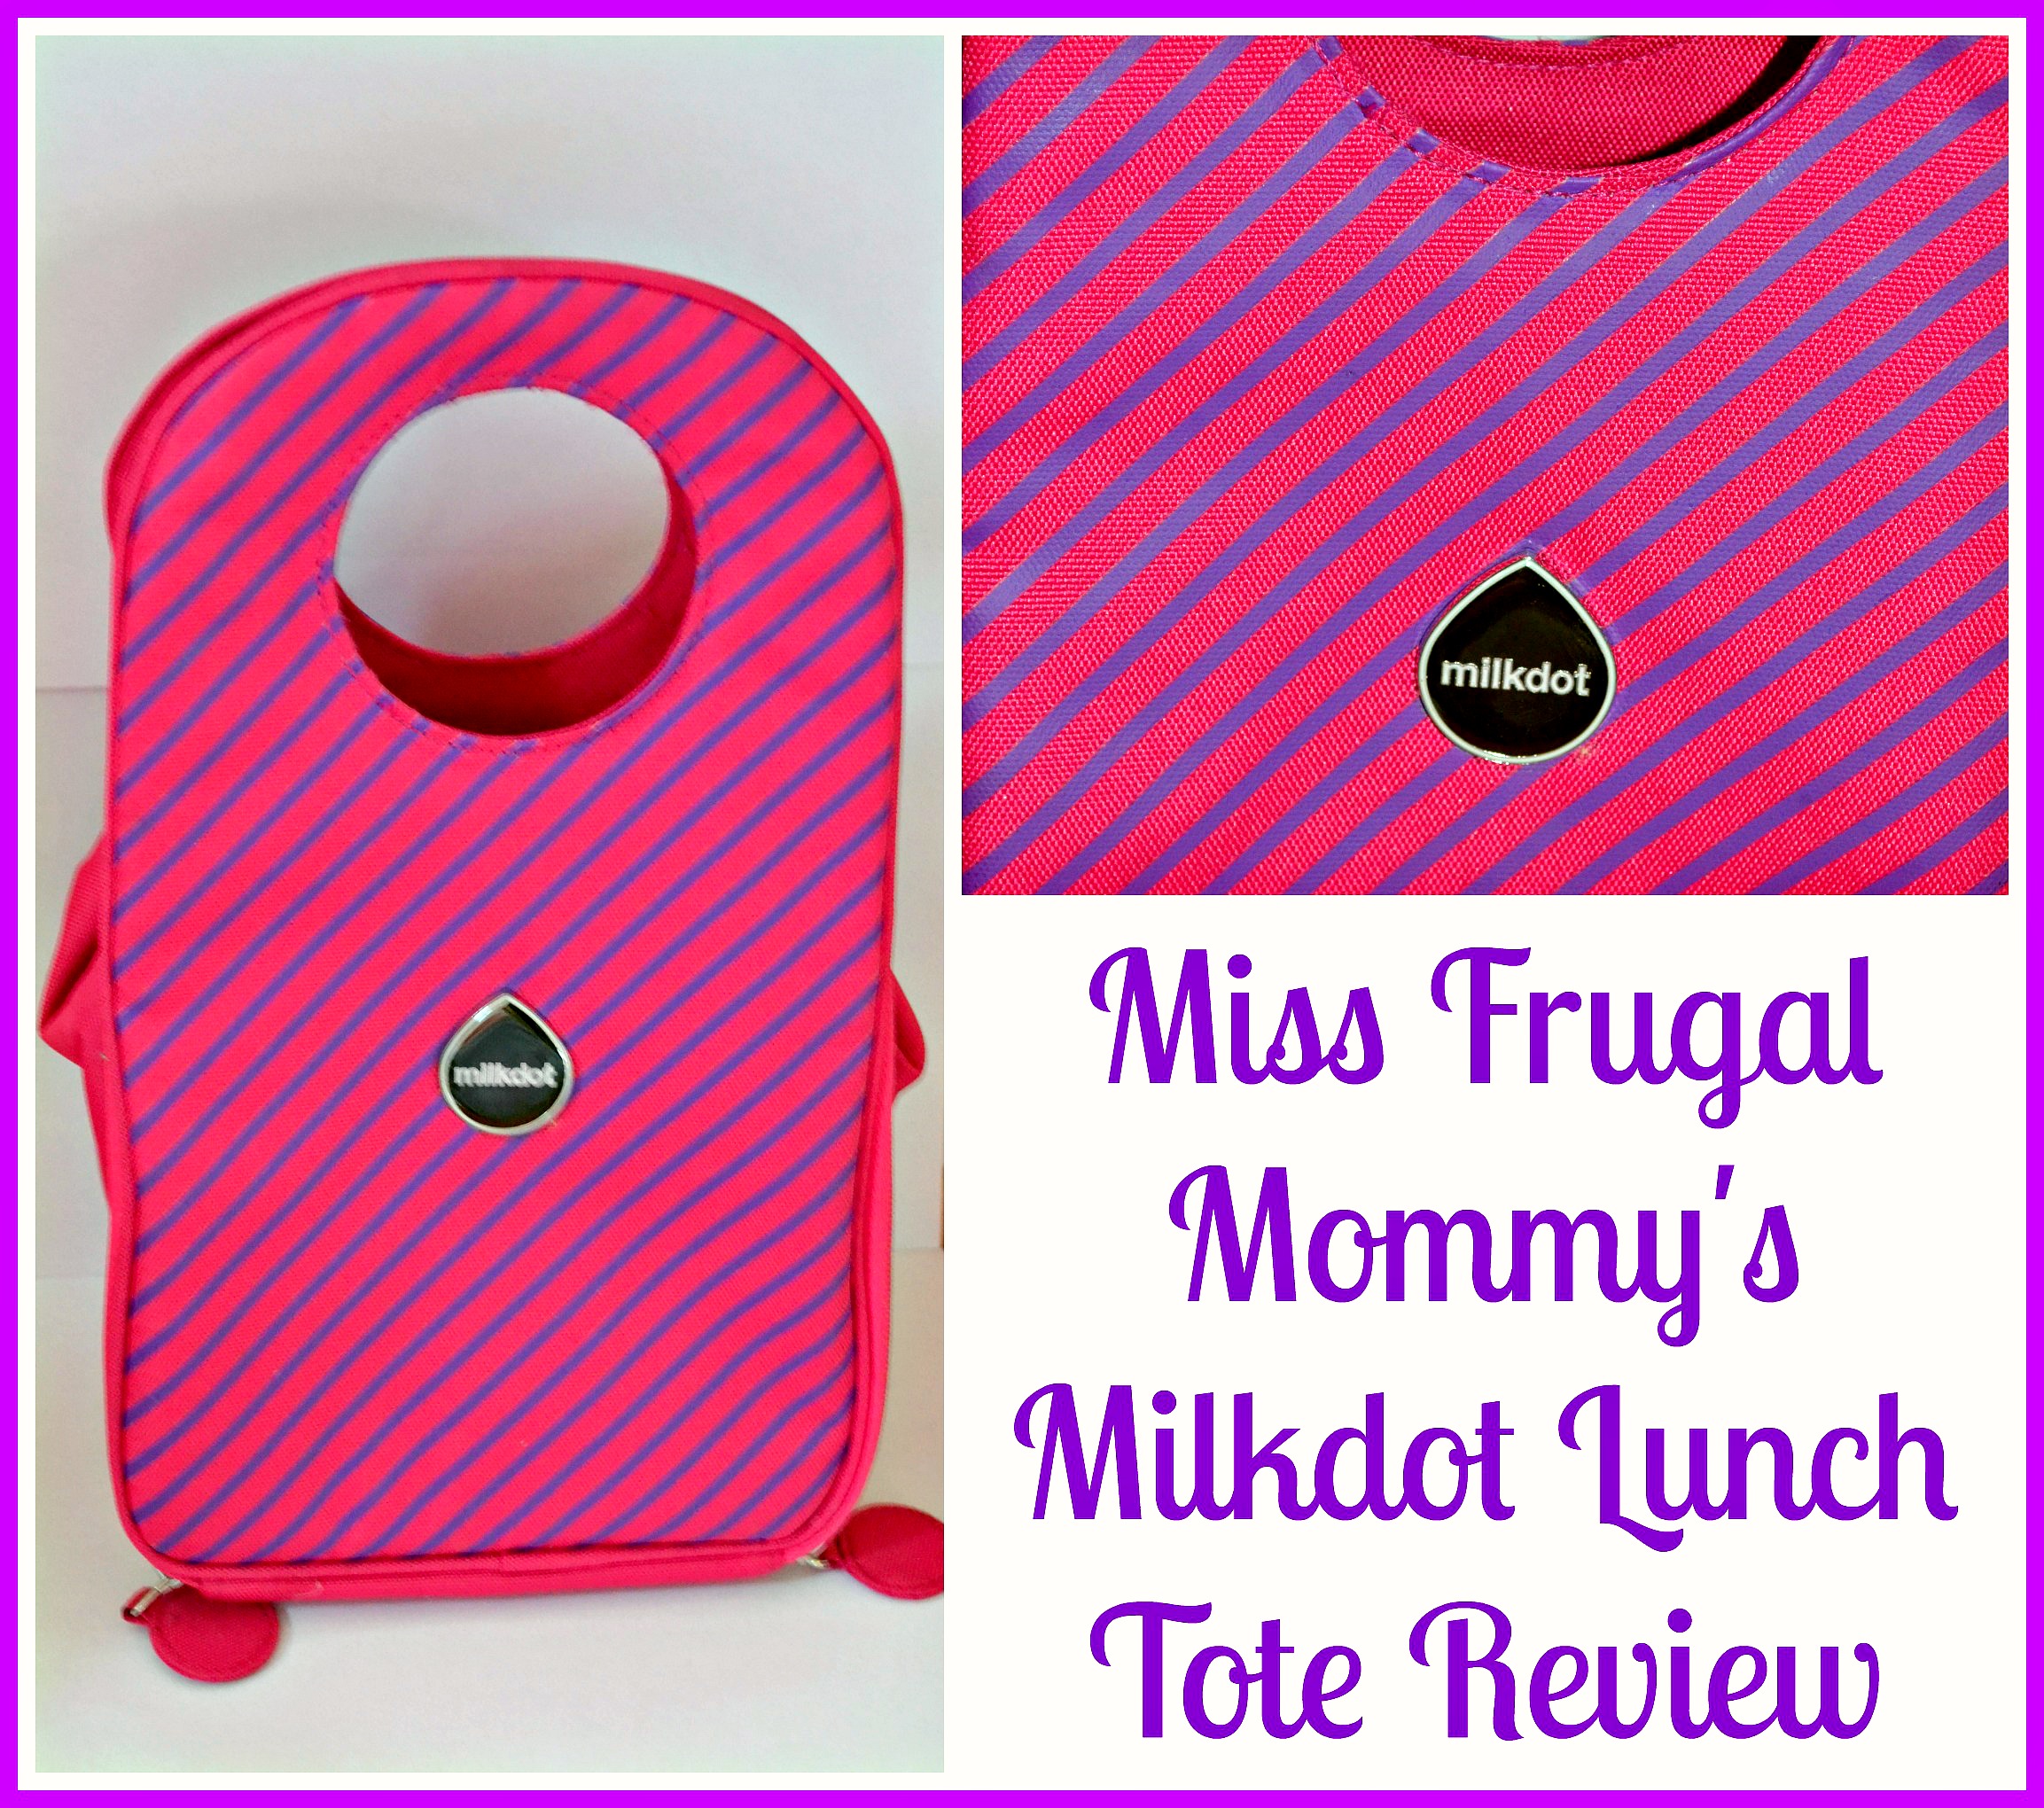 Milkdot Lunch Tote Review